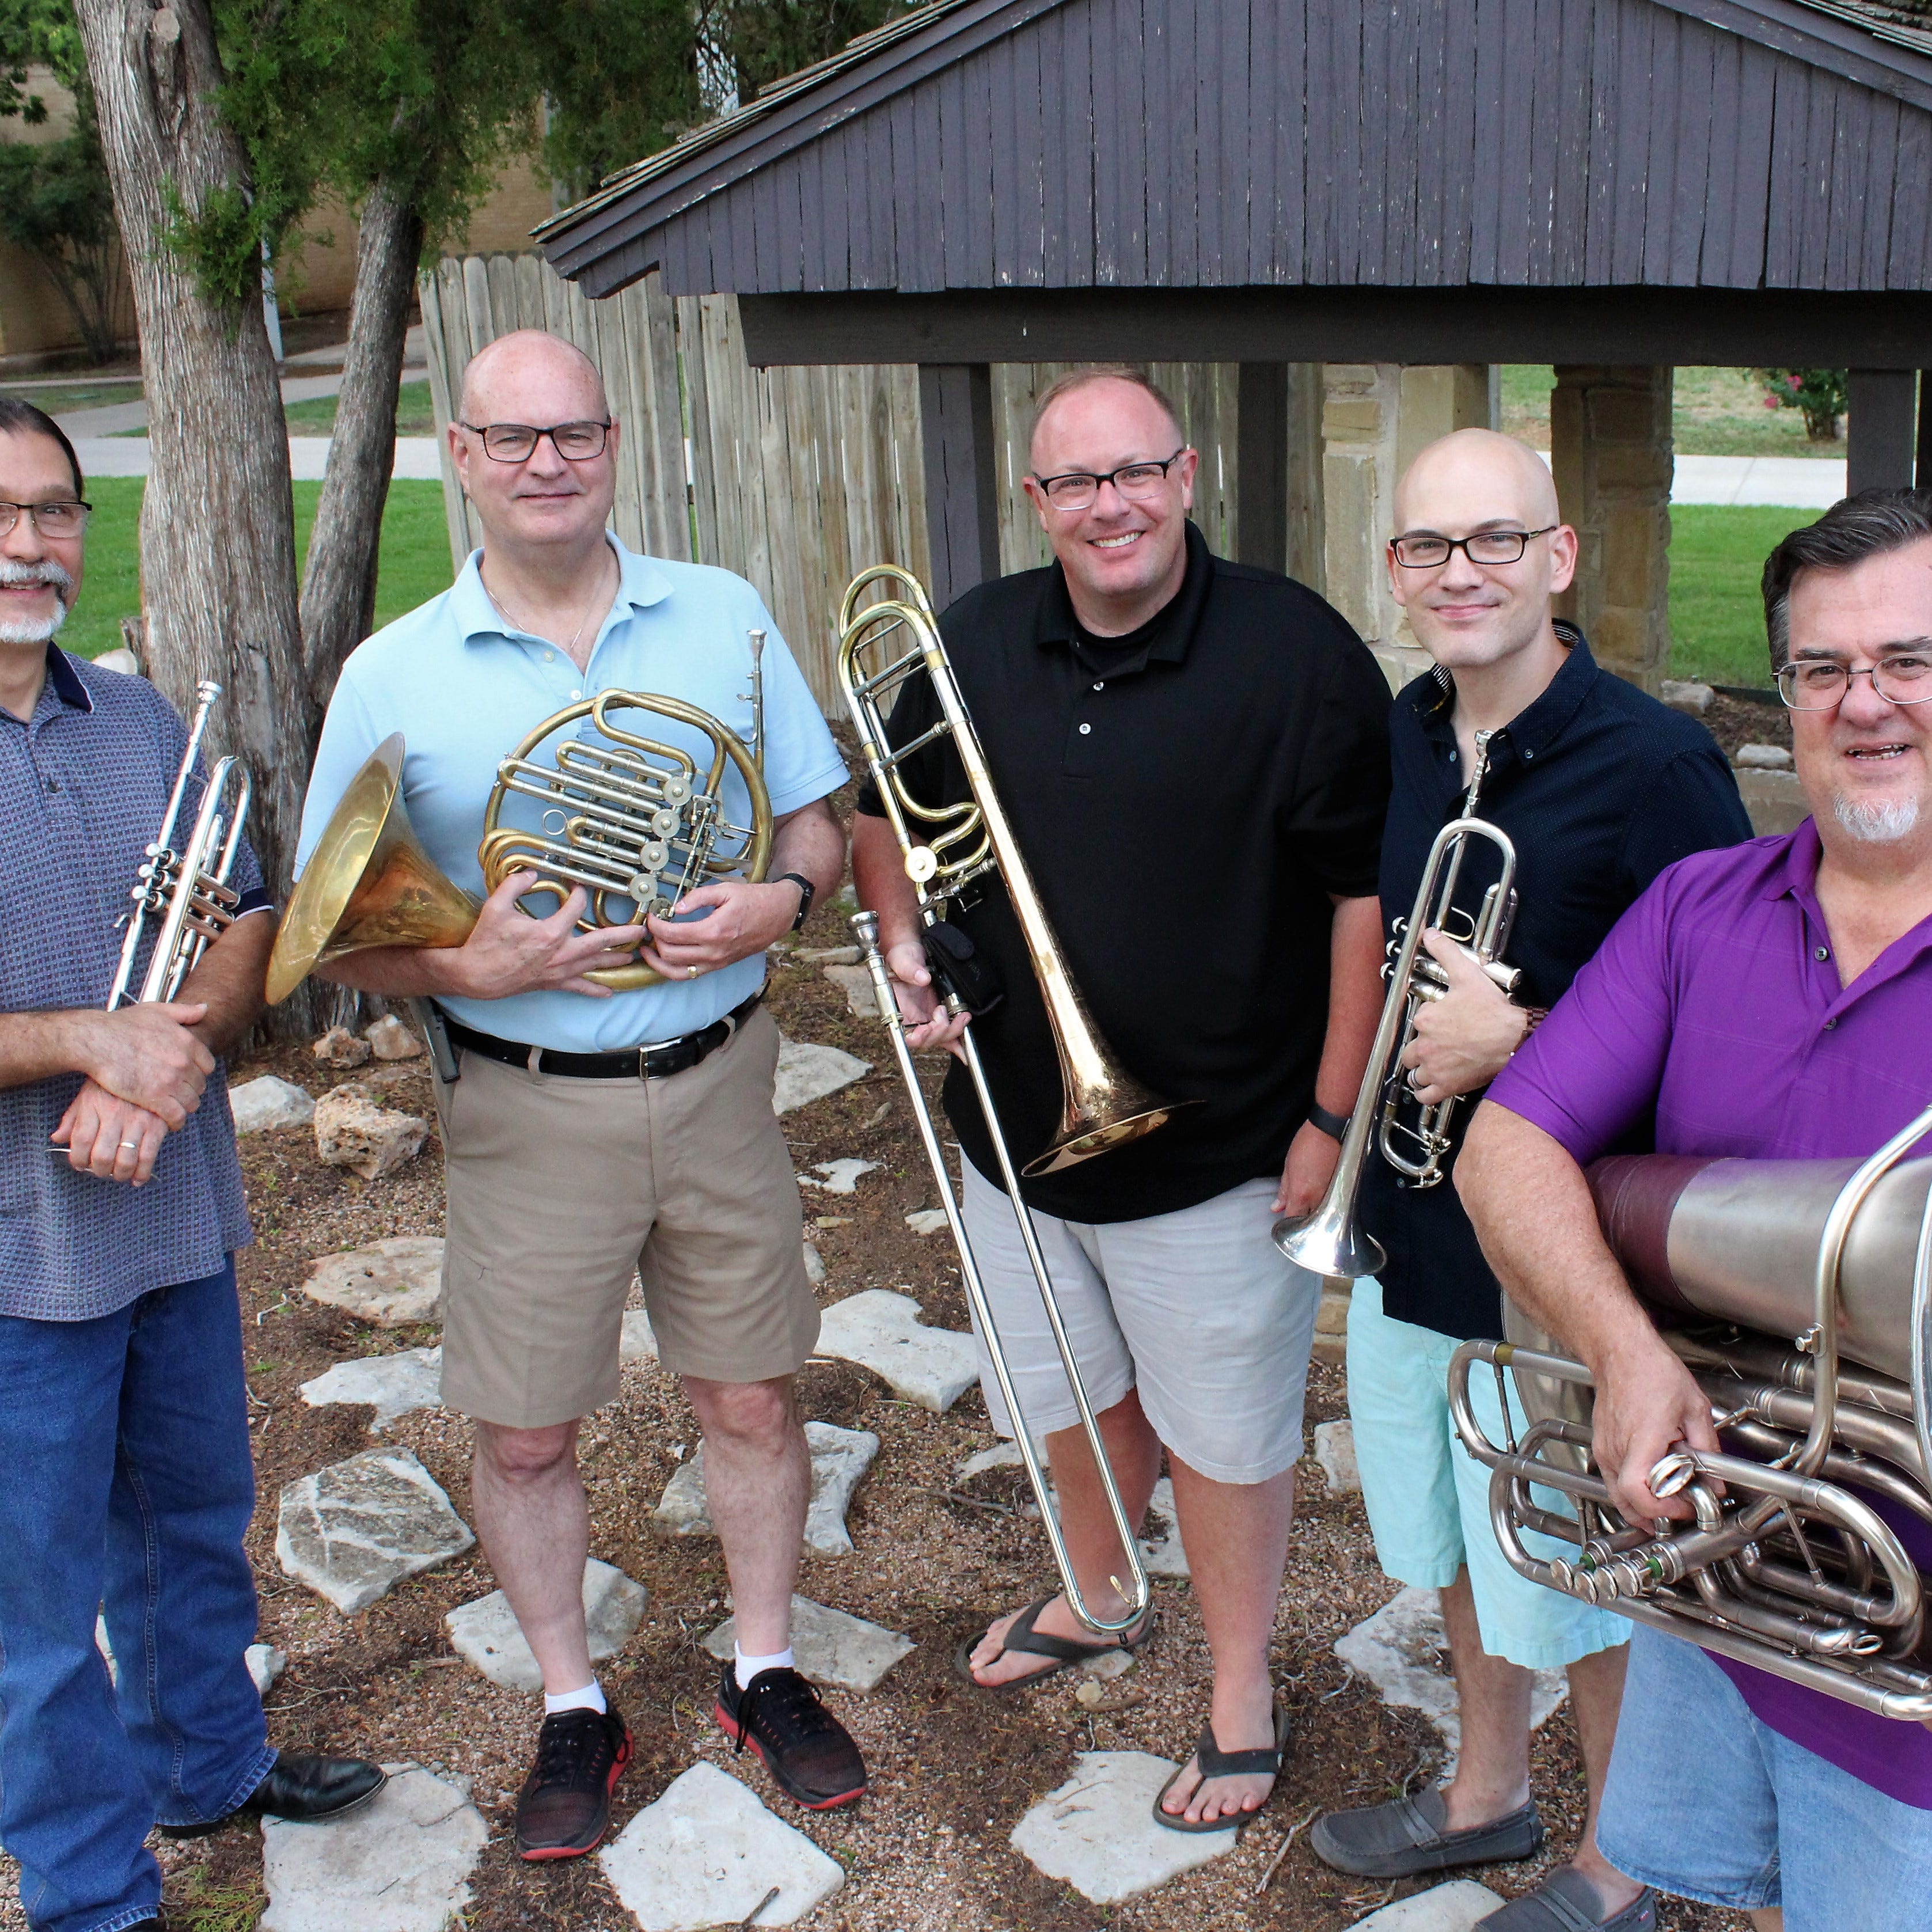 Key City Brass is, from left, Bernie Scherr, Rob Tucker, Clay Johnson, David Amlung and Jeff Cottrell. The quintet will perform a July 4 evening concert at Episcopal Church of the Heavenly Rest. The performance will be livestreamed. June 30 2020